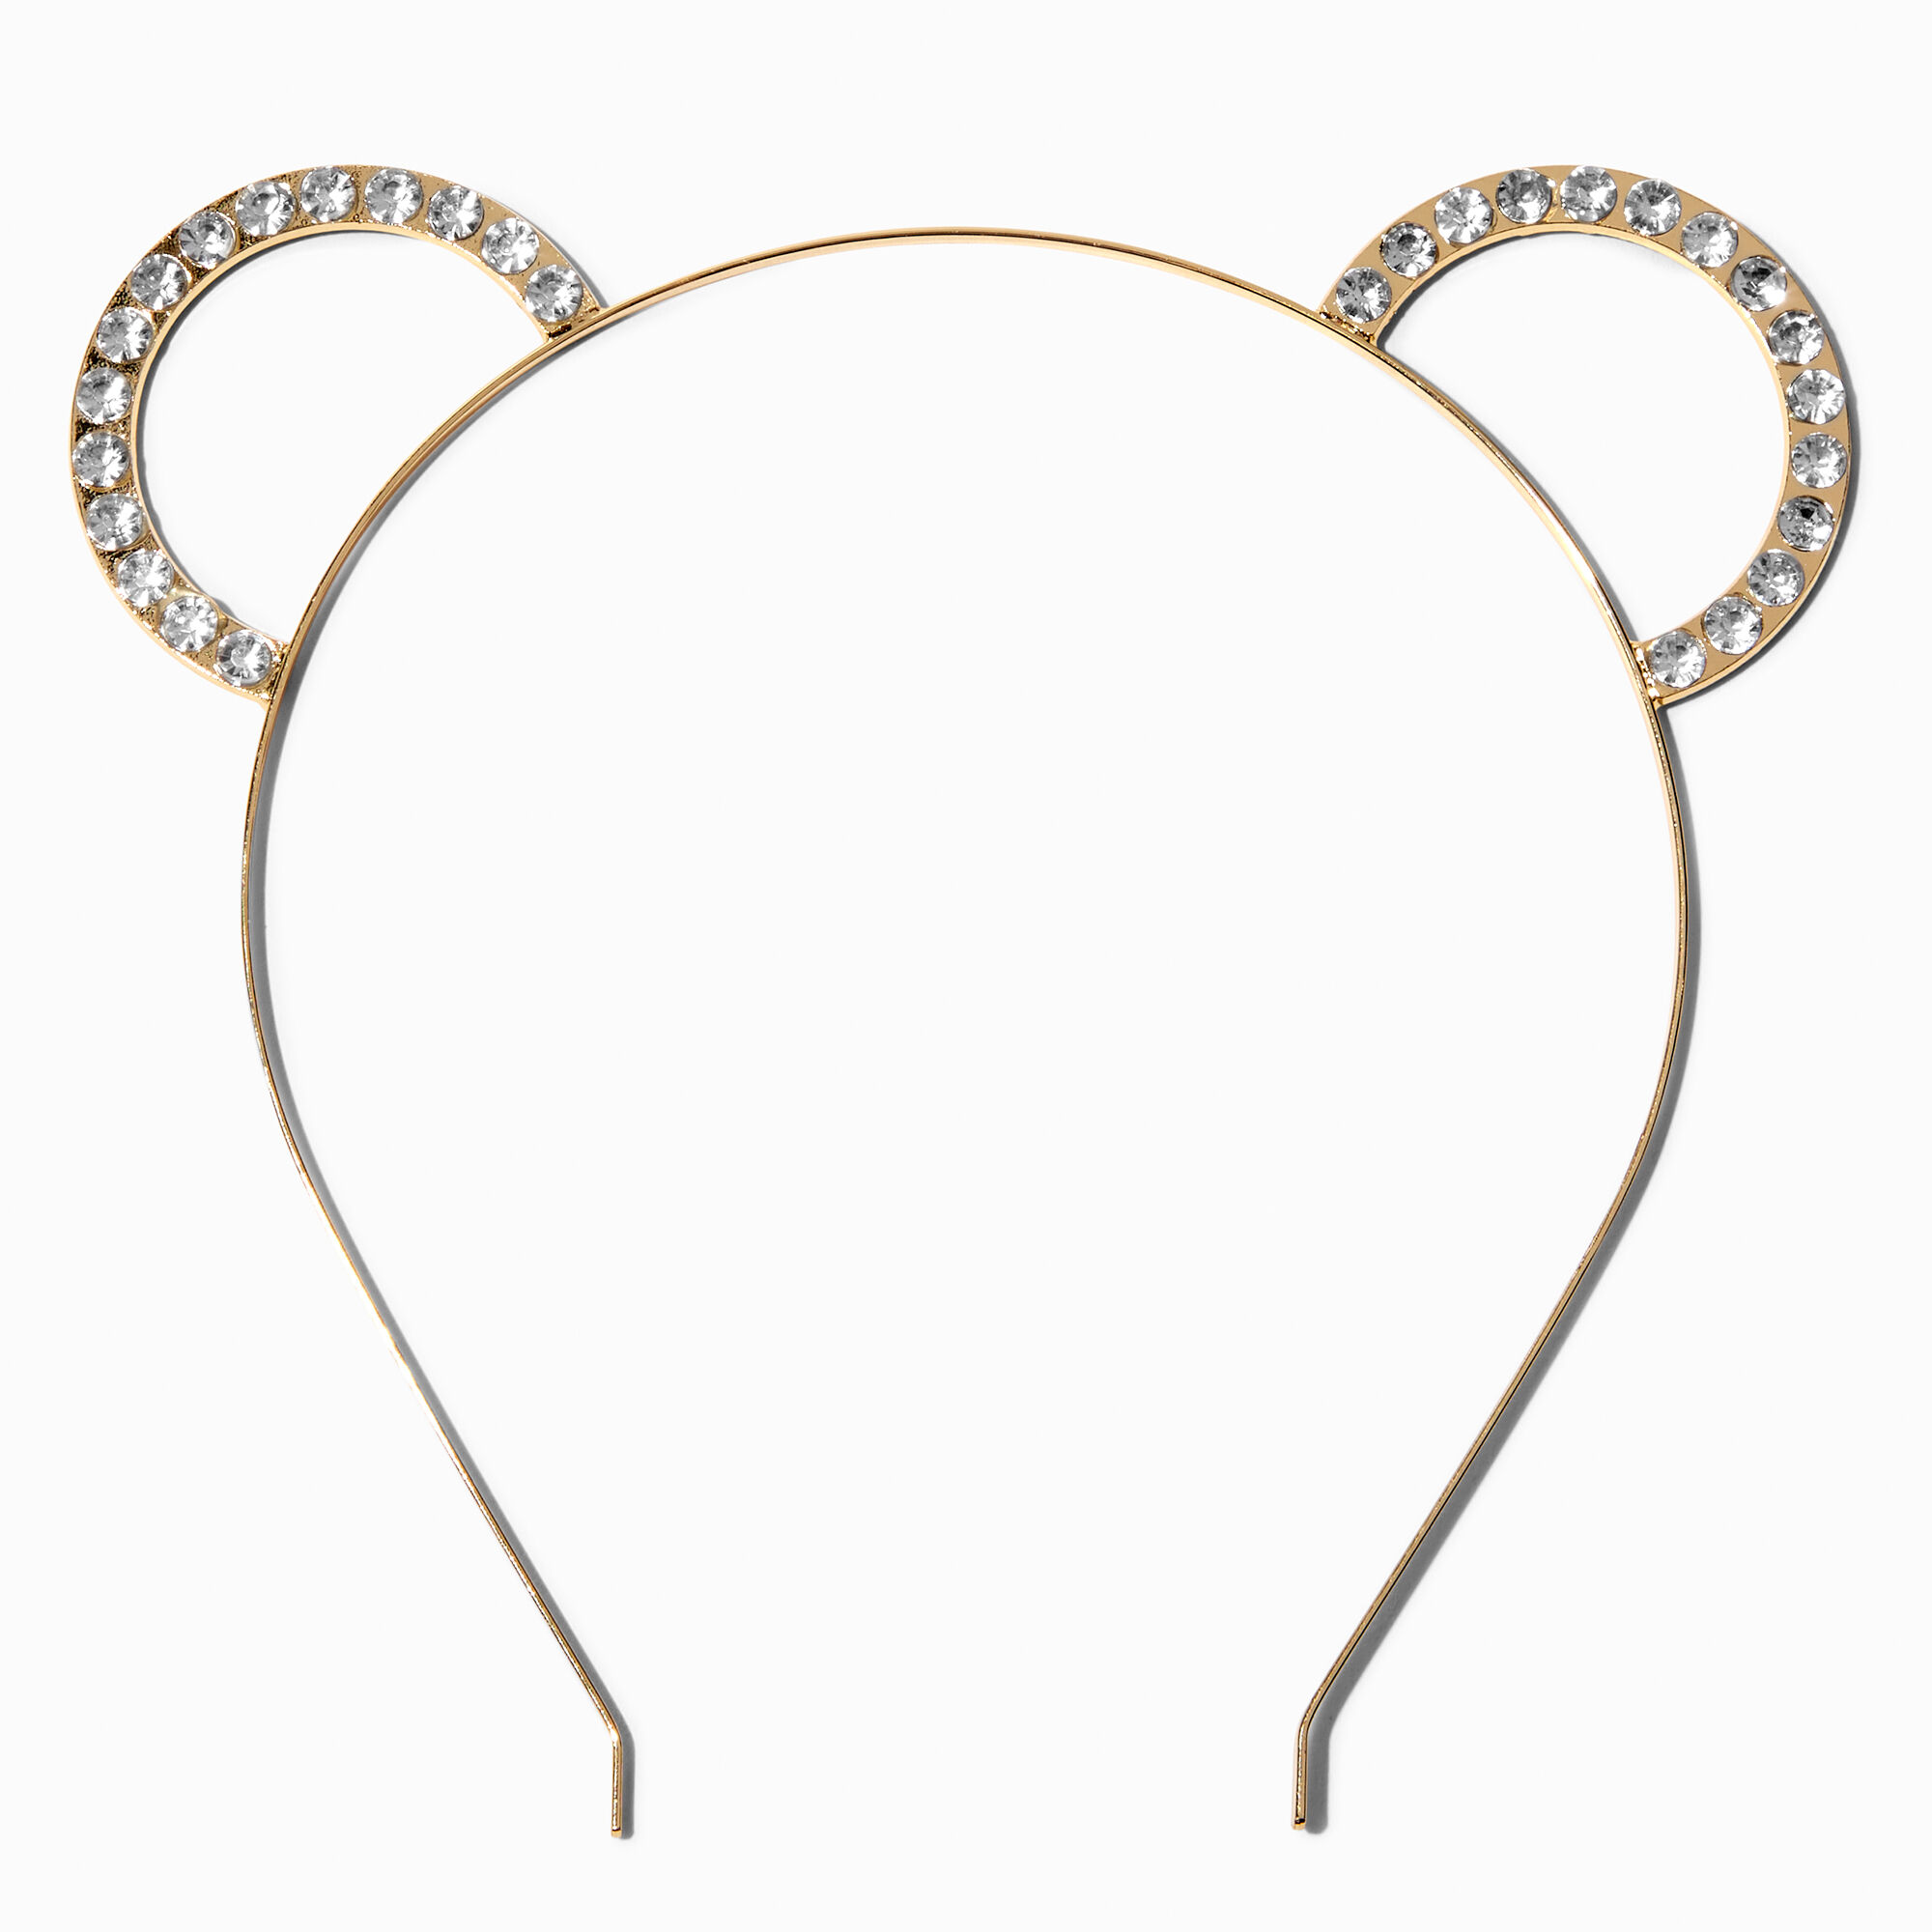 View Claires Embellished Bear Ears Headband Gold information